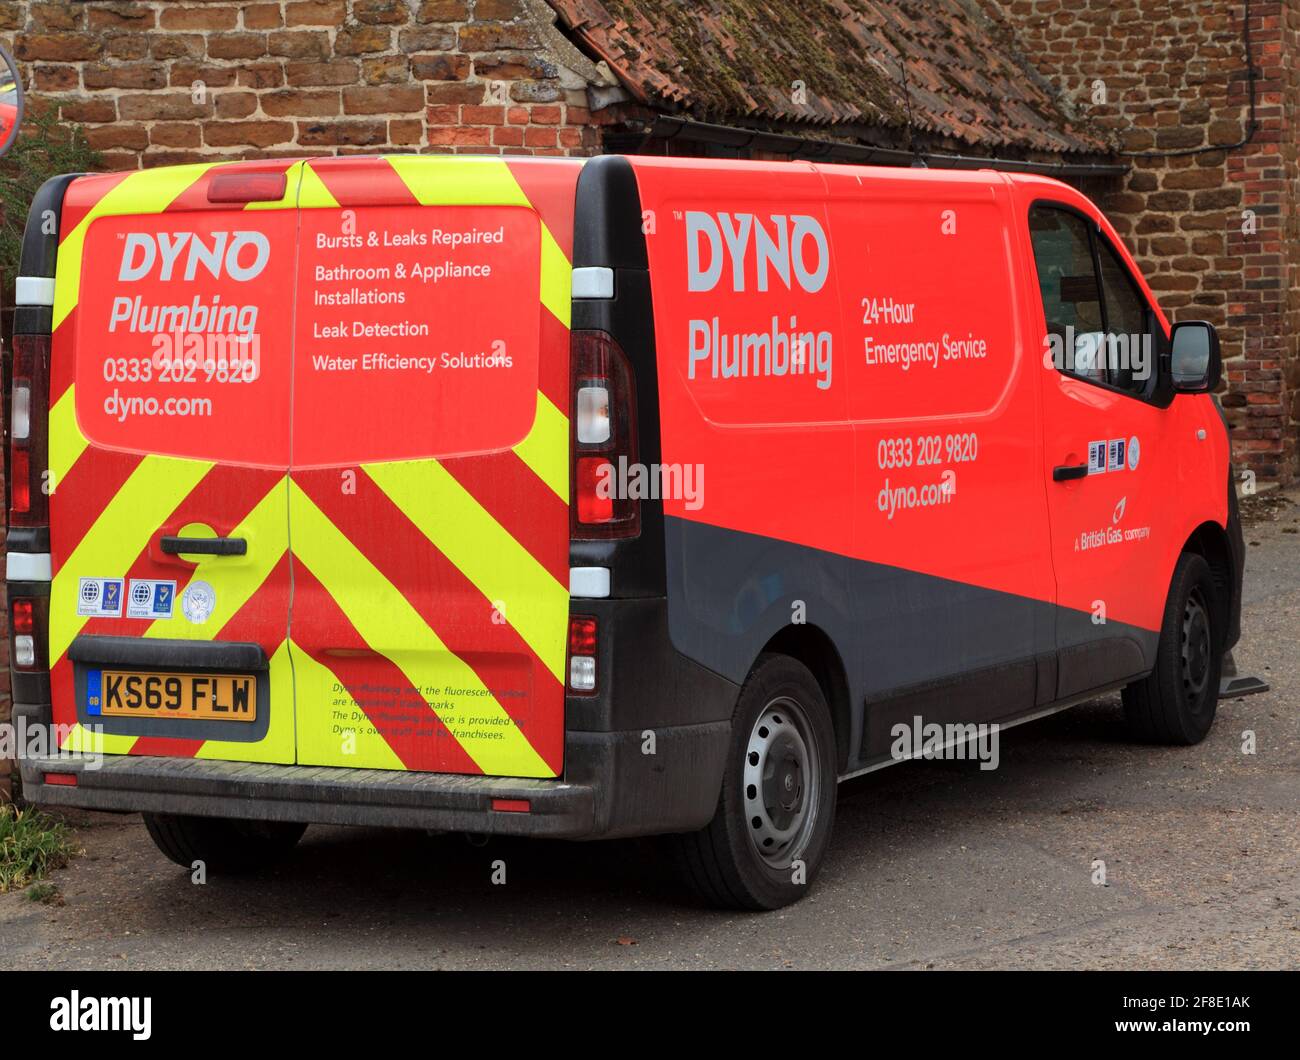 Dyno Plumbing, fourgonnette, véhicule, British Gas Company, Norfolk, Angleterre. Banque D'Images